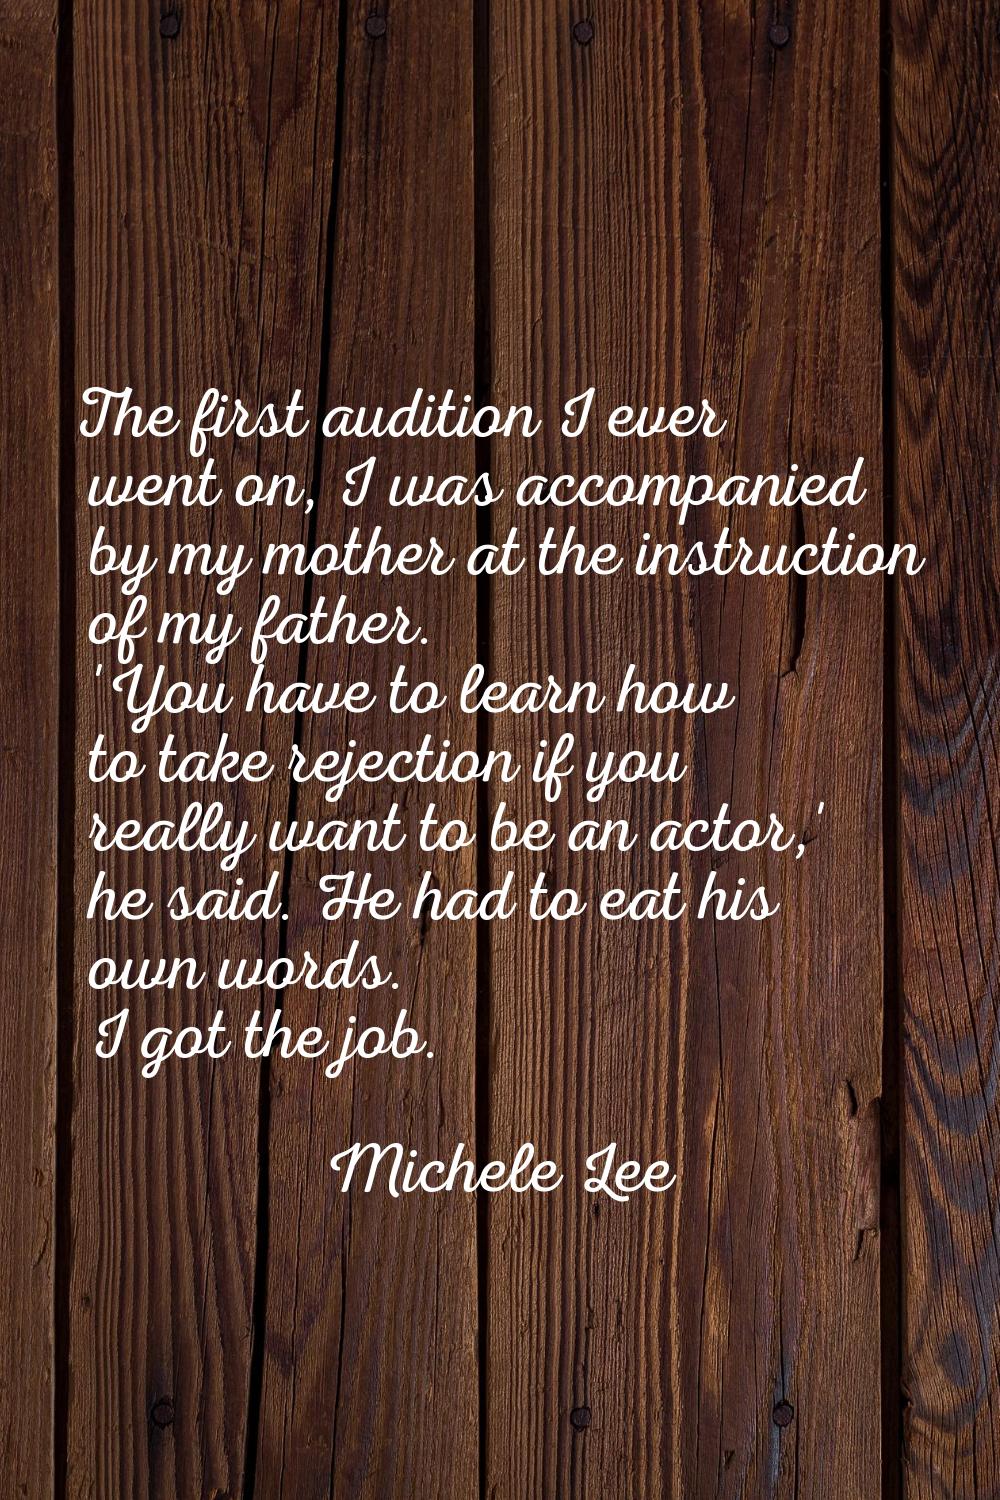 The first audition I ever went on, I was accompanied by my mother at the instruction of my father. 